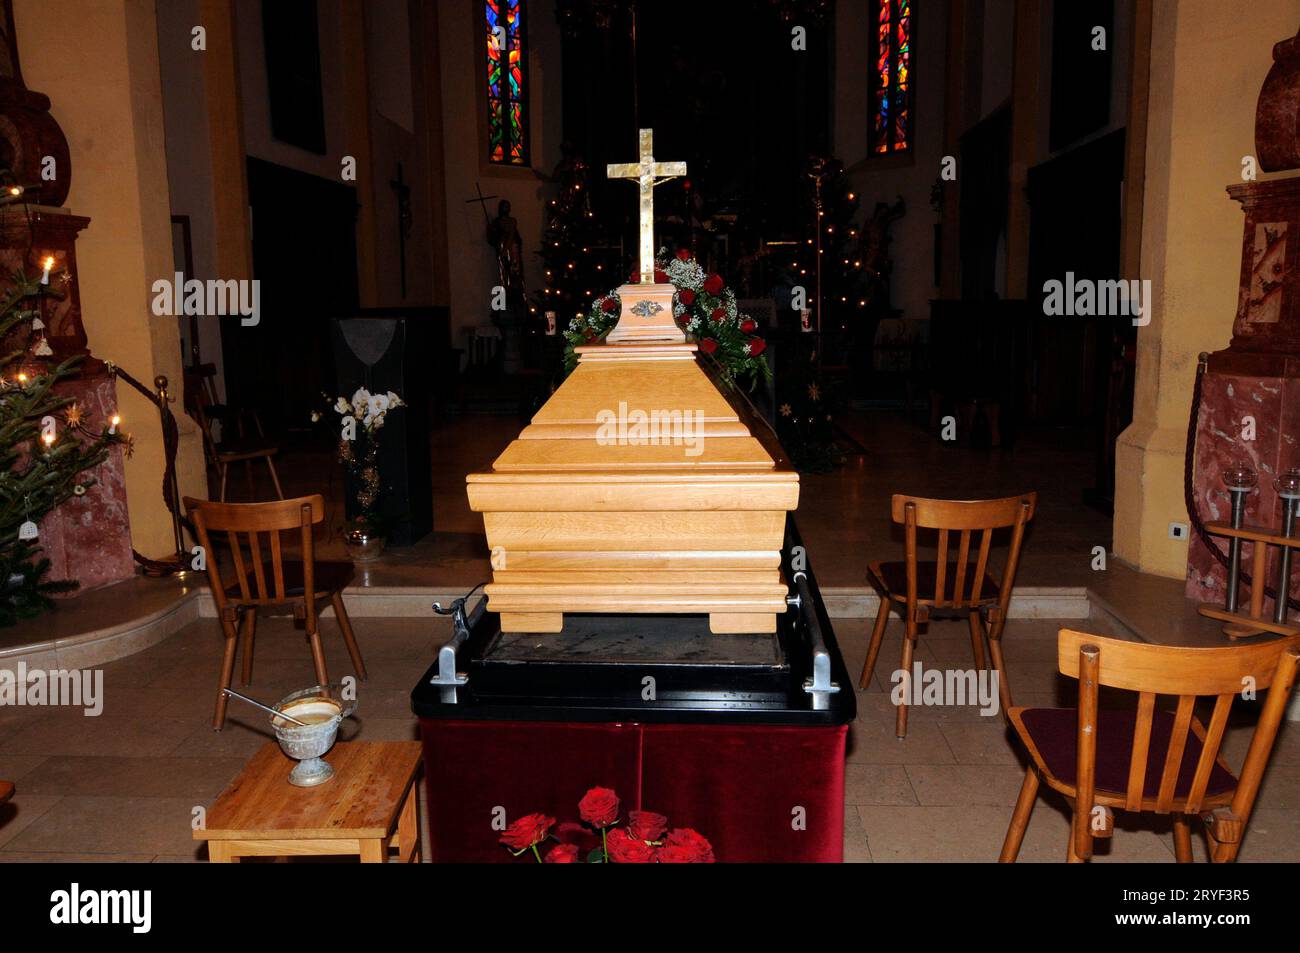 Coffin for a corpse for burial Stock Photo